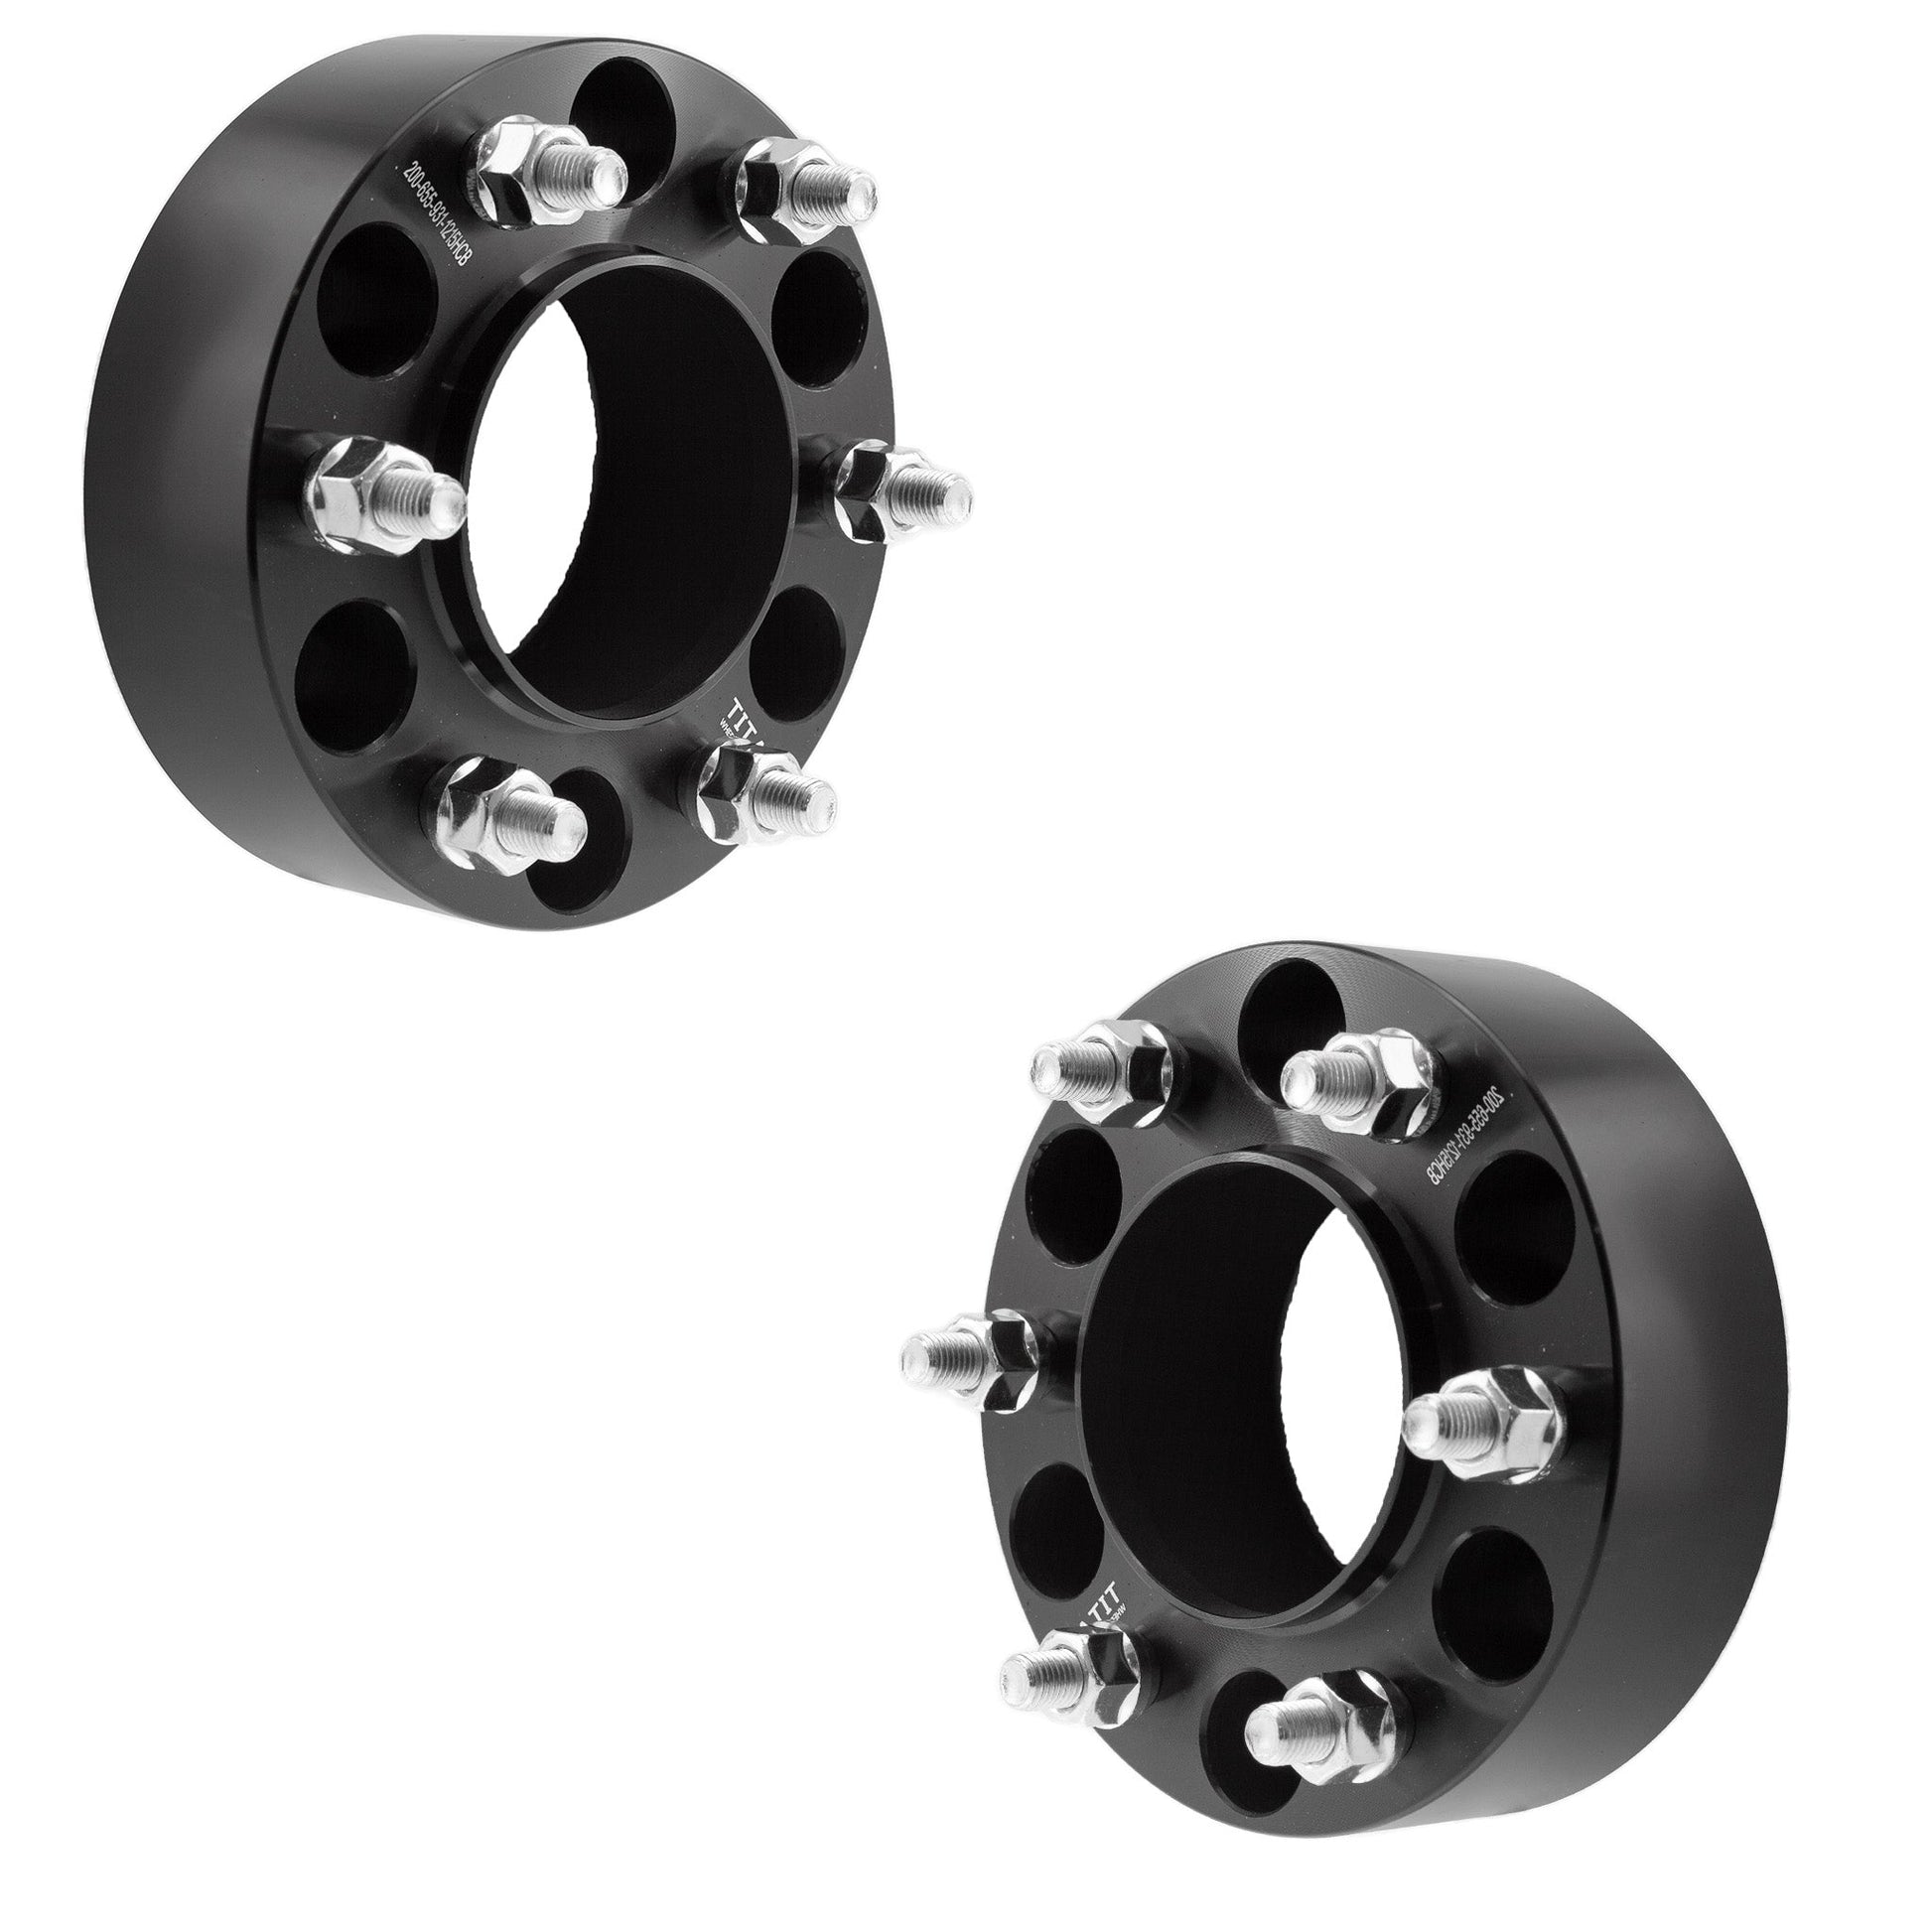 2" (50mm) Titan Wheel Spacers for Ford Bronco 2021-2022 Ranger 2019+ | 6x5.5 (6x139.7) | 93.1 Hubcentric | 12x1.5 Studs | Set of 4 | Titan Wheel Accessories